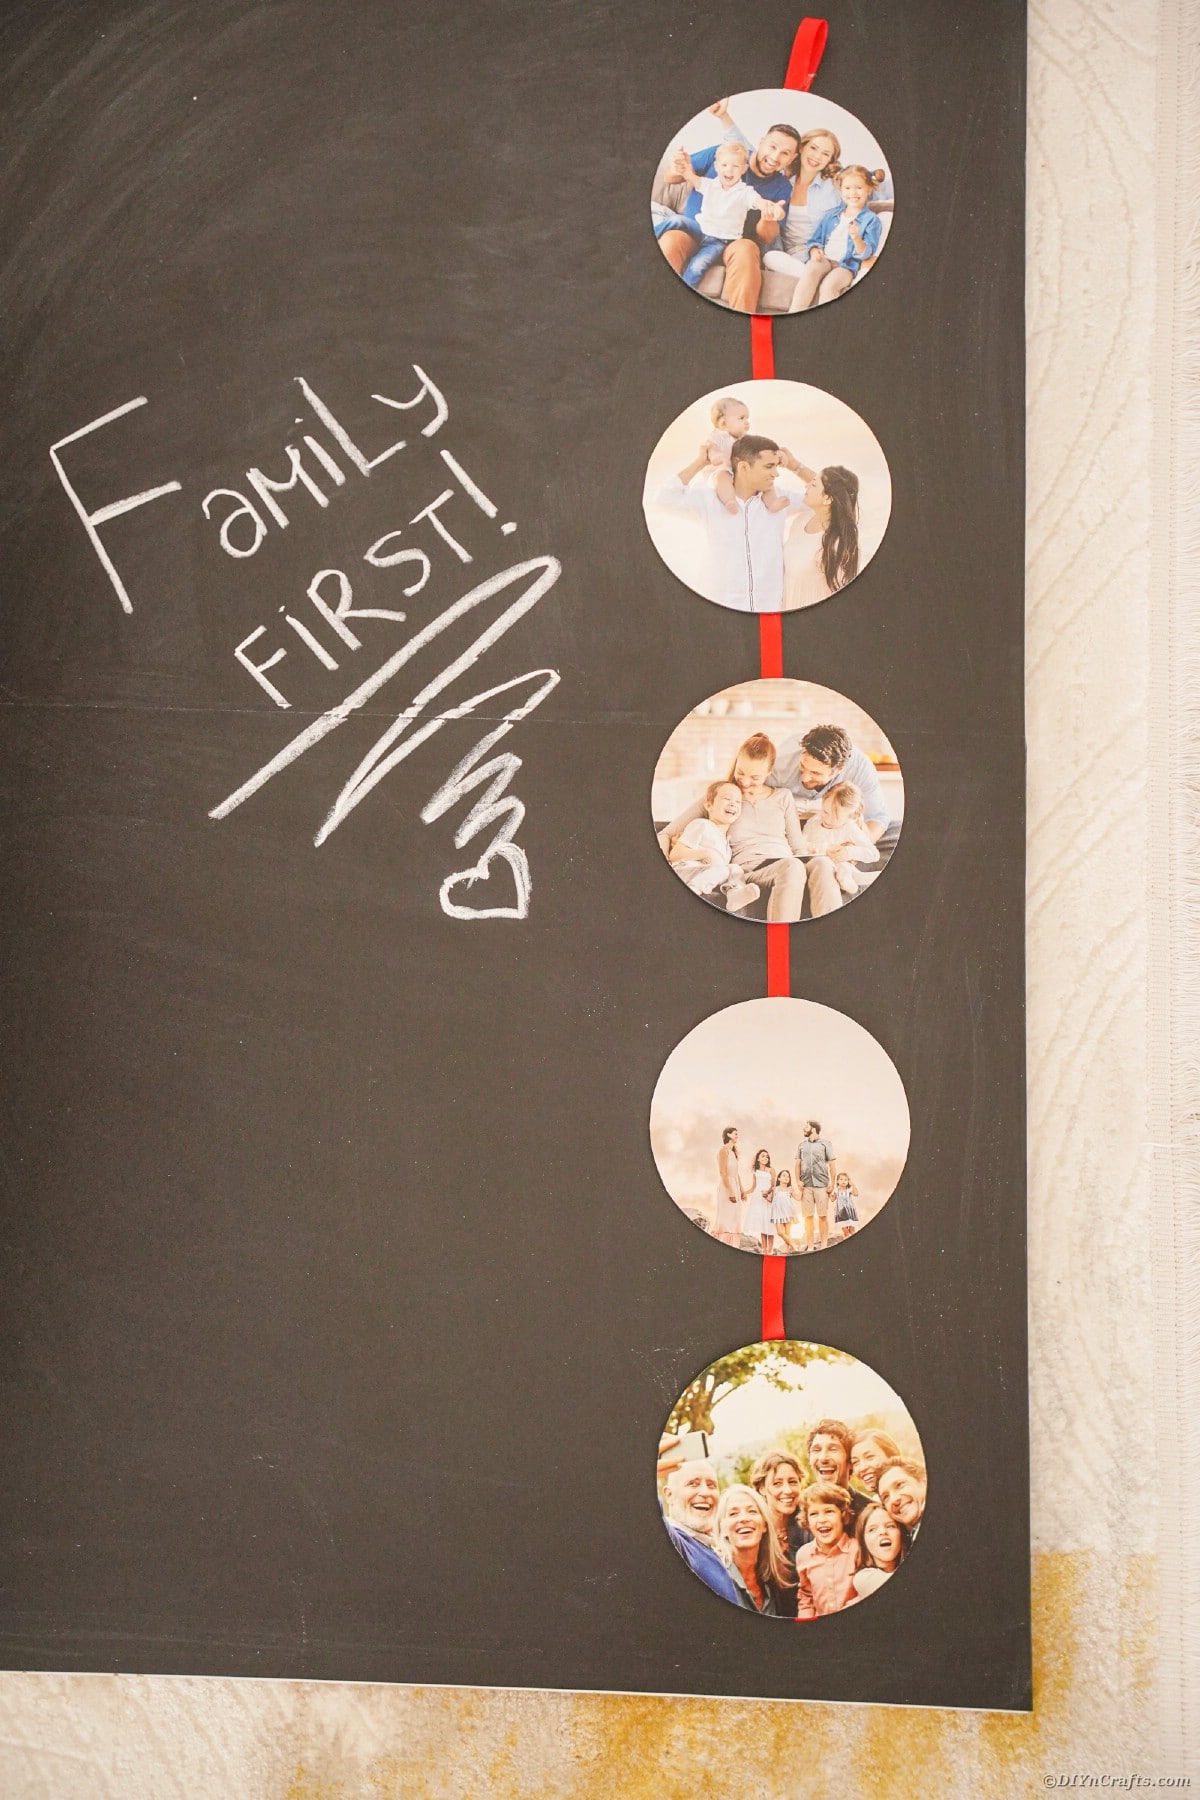 Chalkboard on wall with photo ribbon with red ribbon